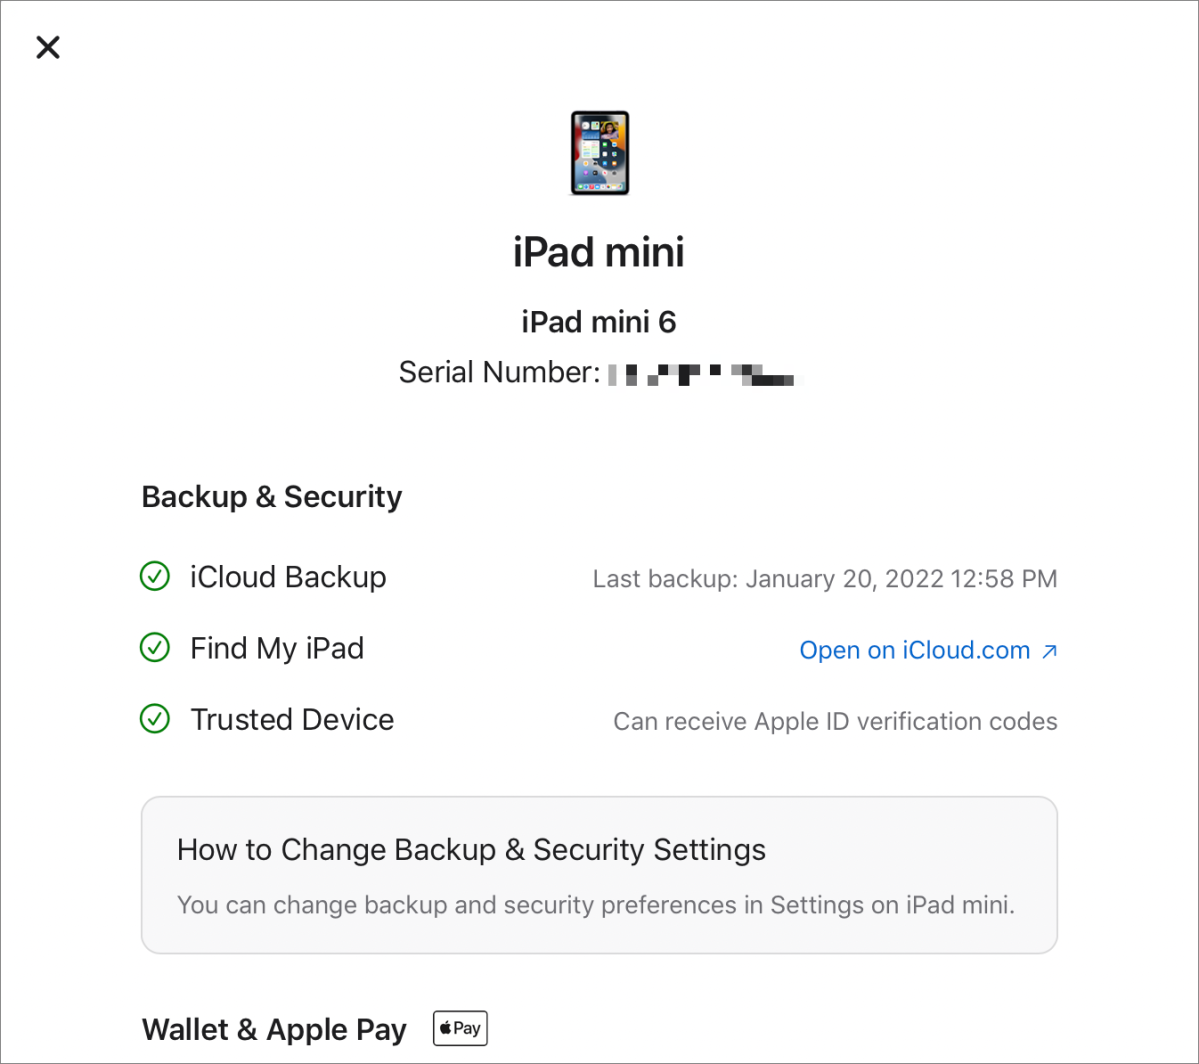 The best way to discover out what gadgets are logged into your iCloud account